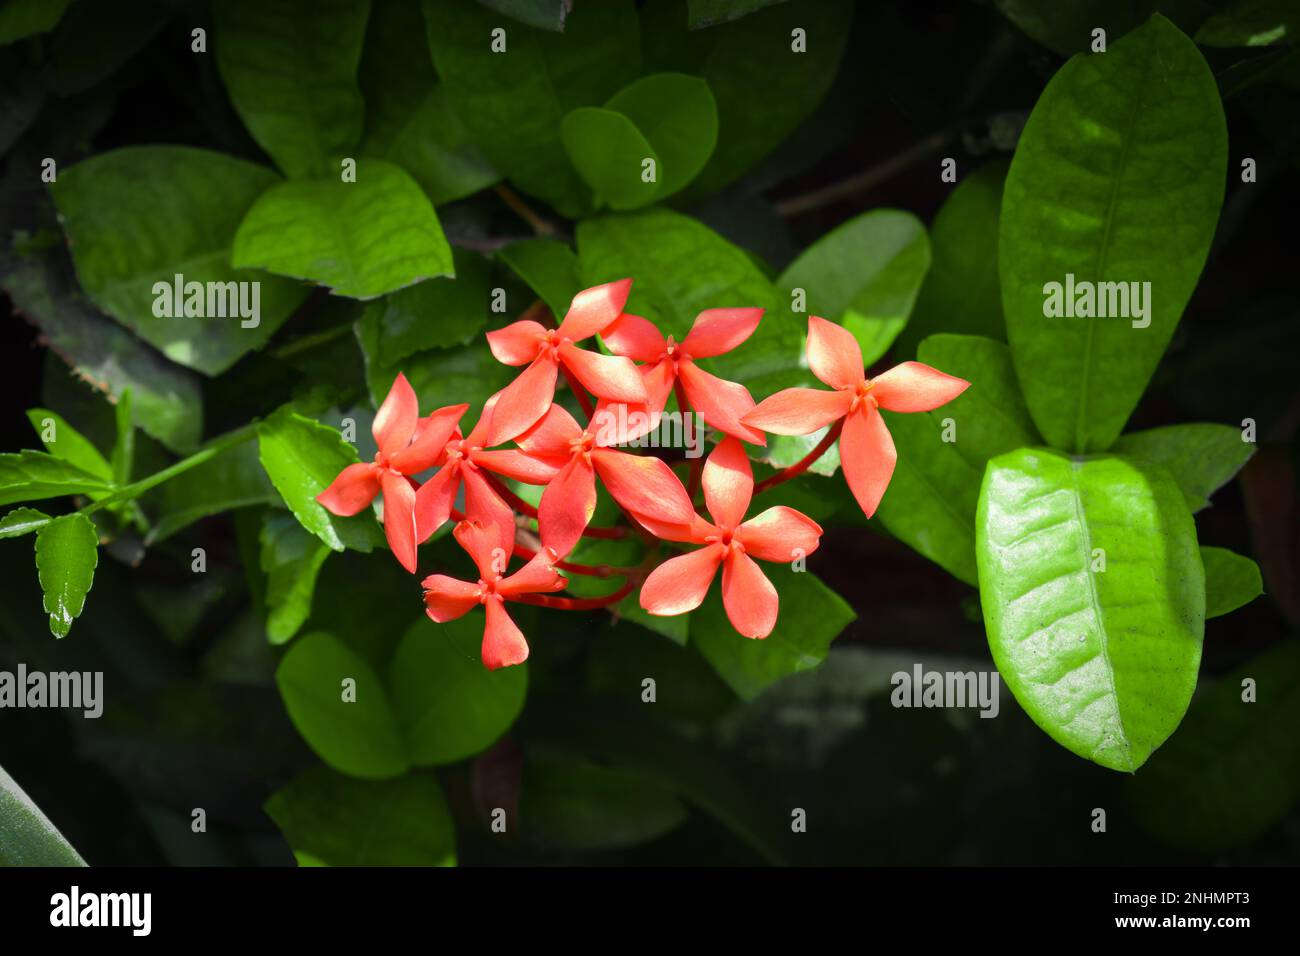 Ixora chinensis, commonly known as Chinese ixora, is a species of plant of the genus Ixora. Rubiaceae flower, Ixora coccinea in the garden Stock Photo